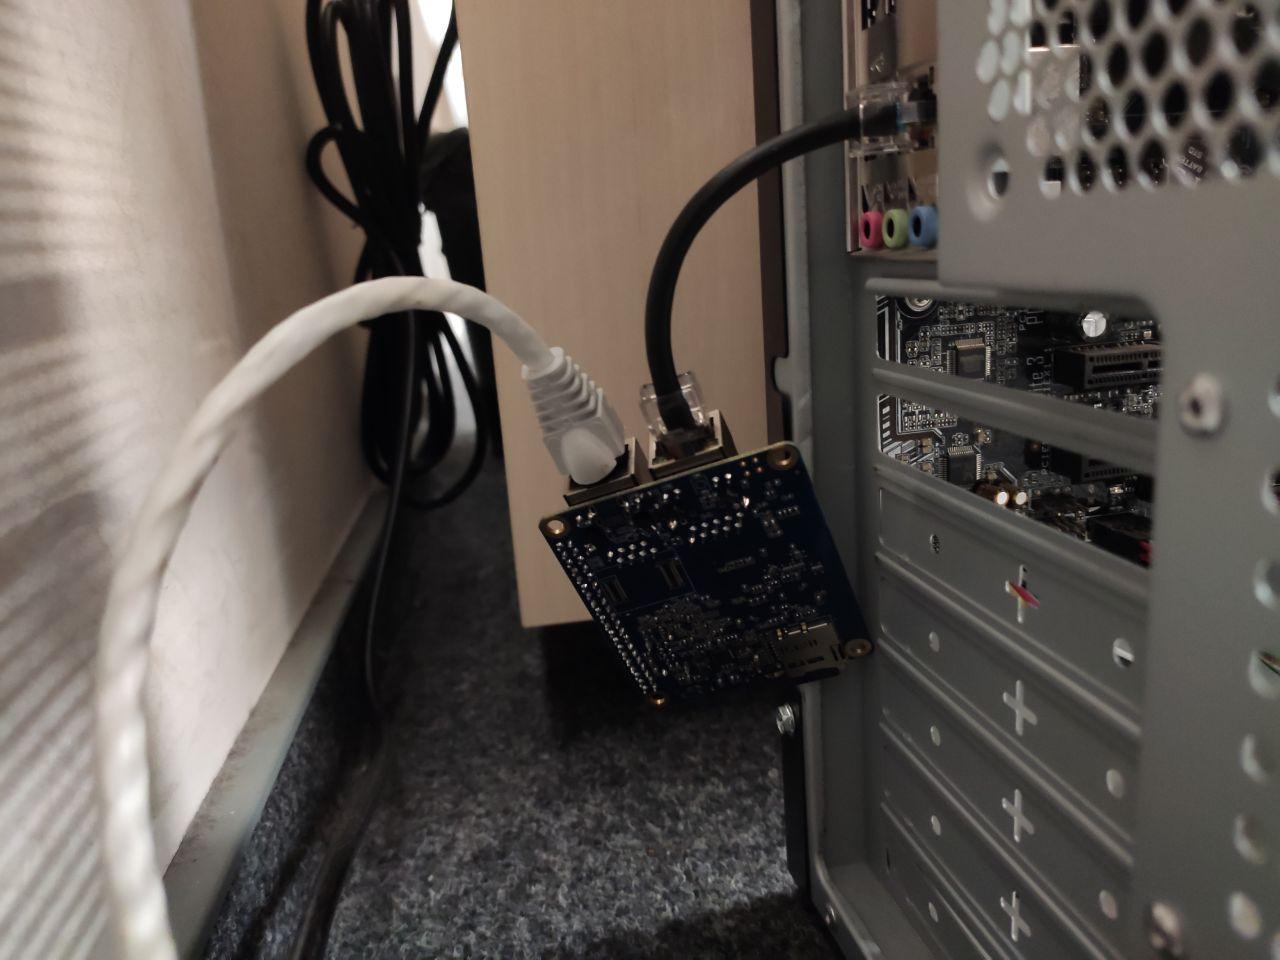 Hardware backdoor is connected 